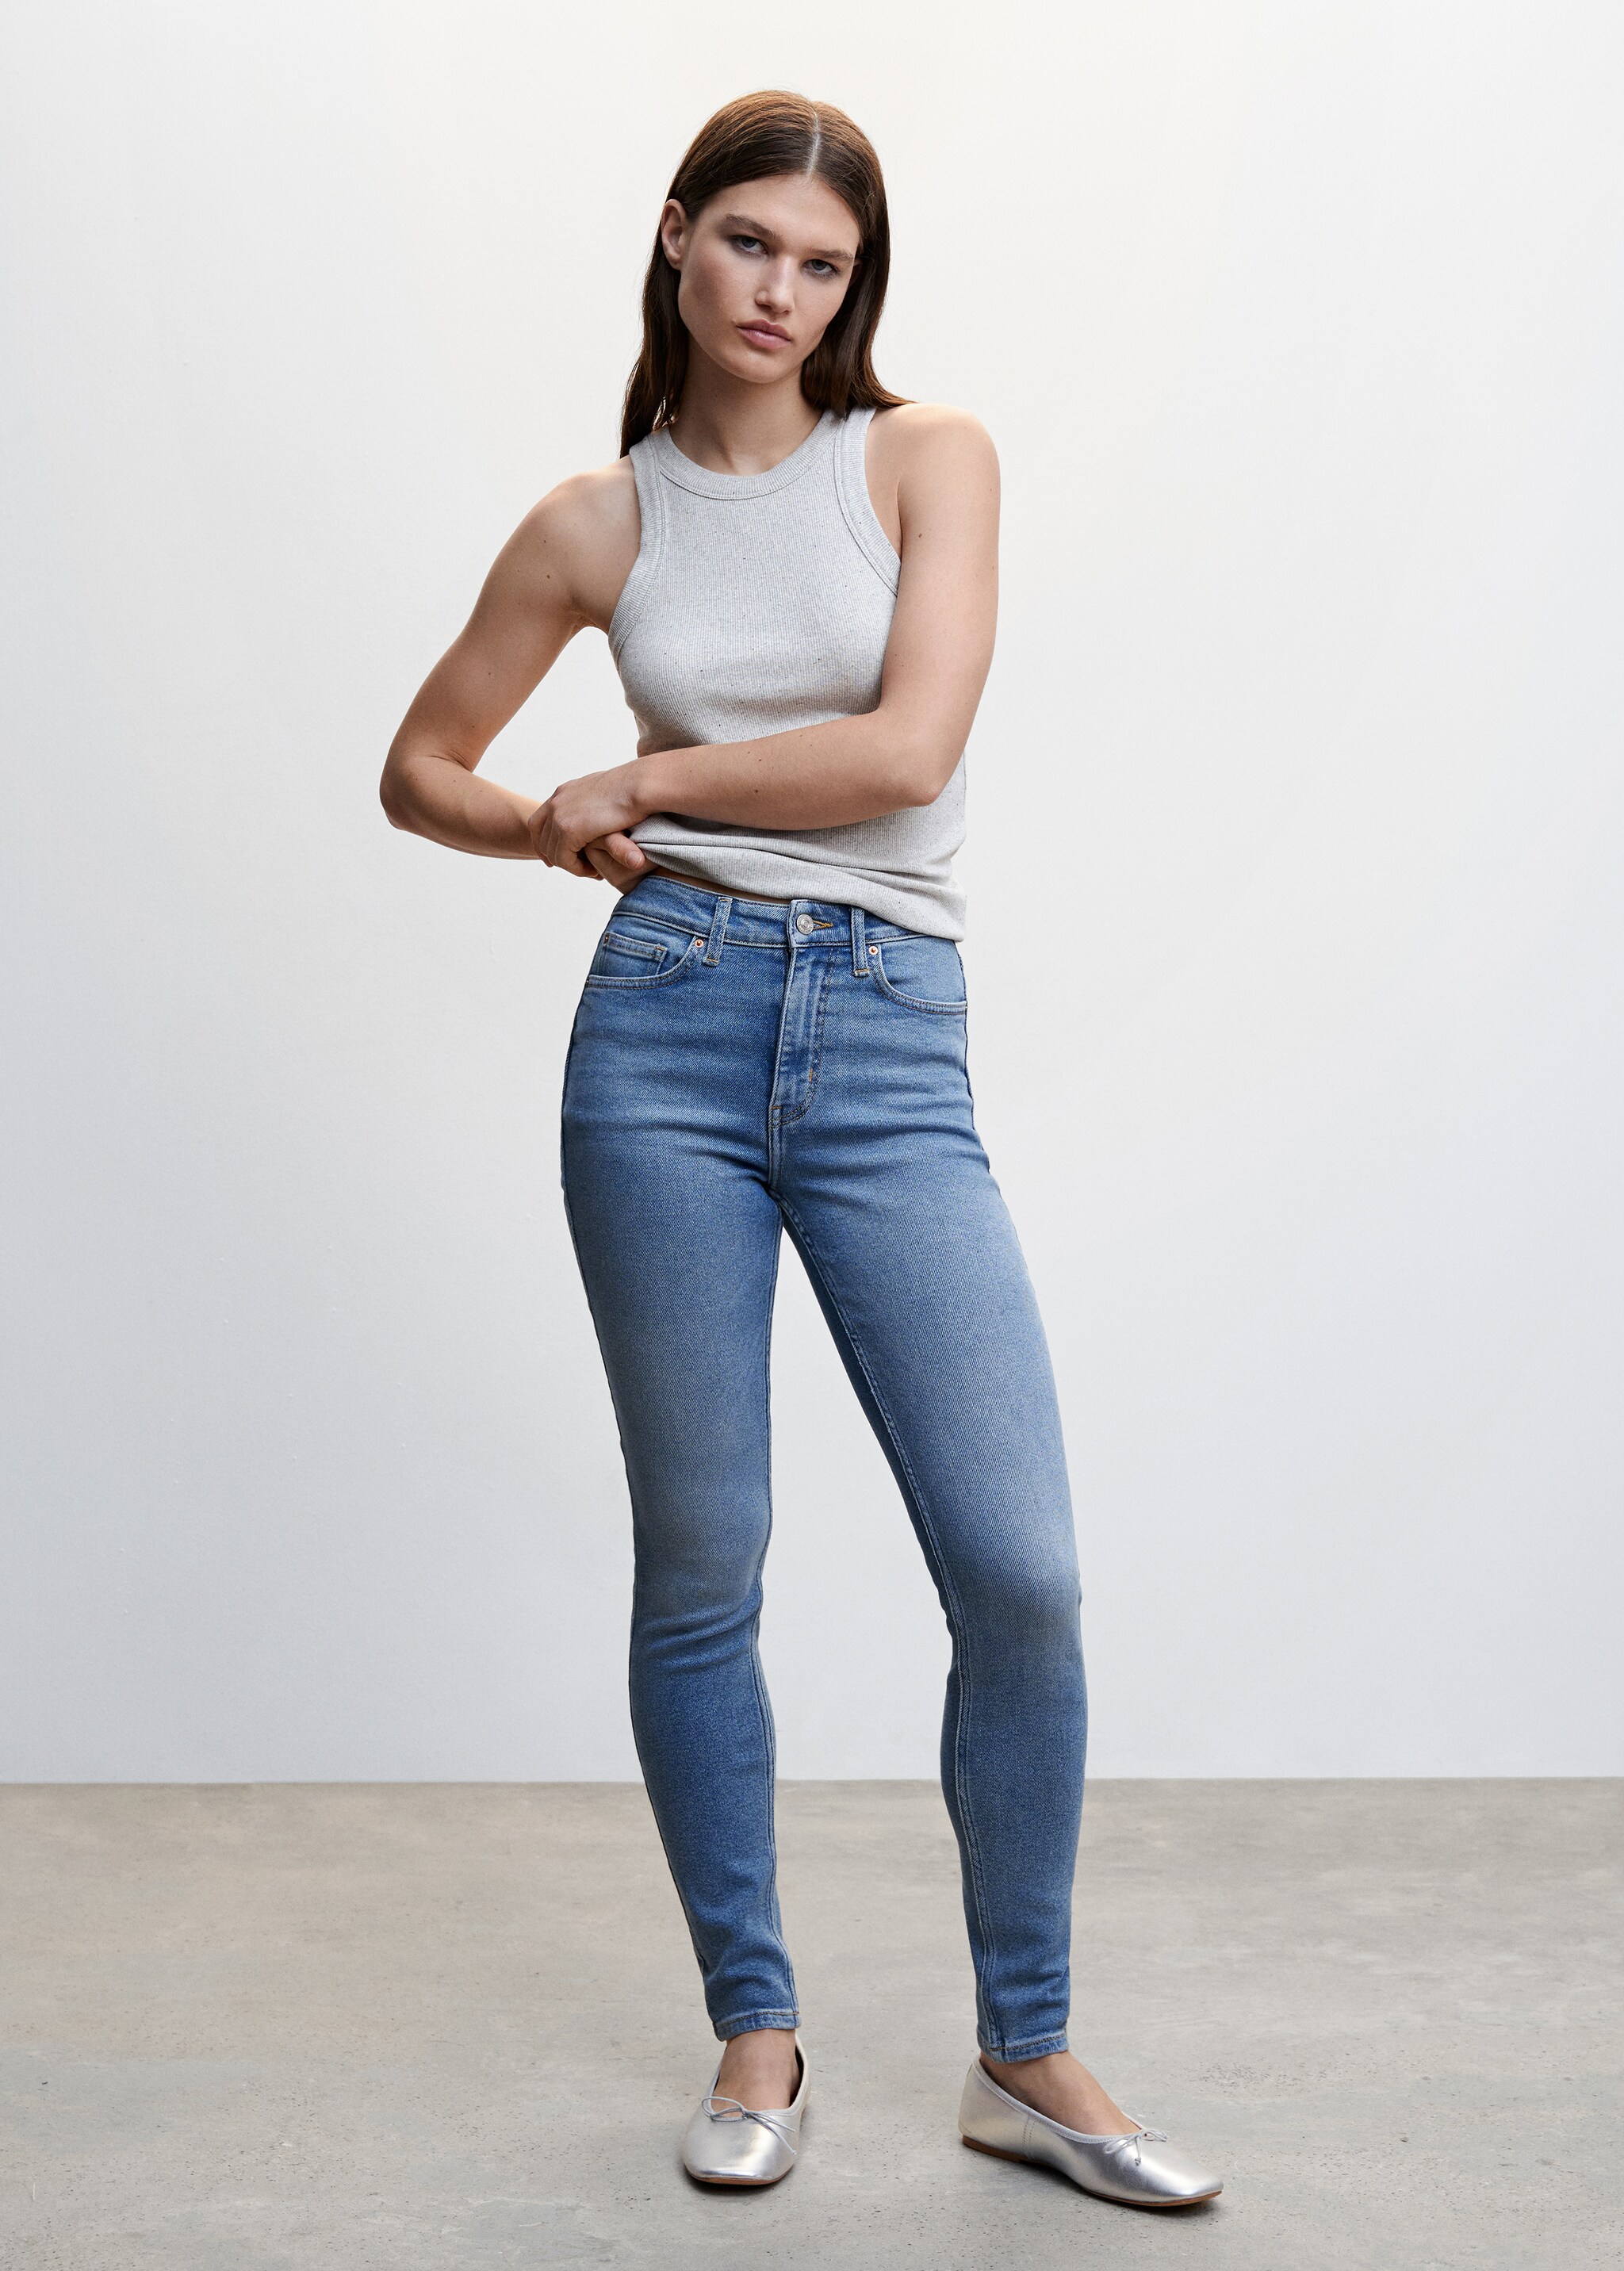 High-rise skinny jeans - General plane